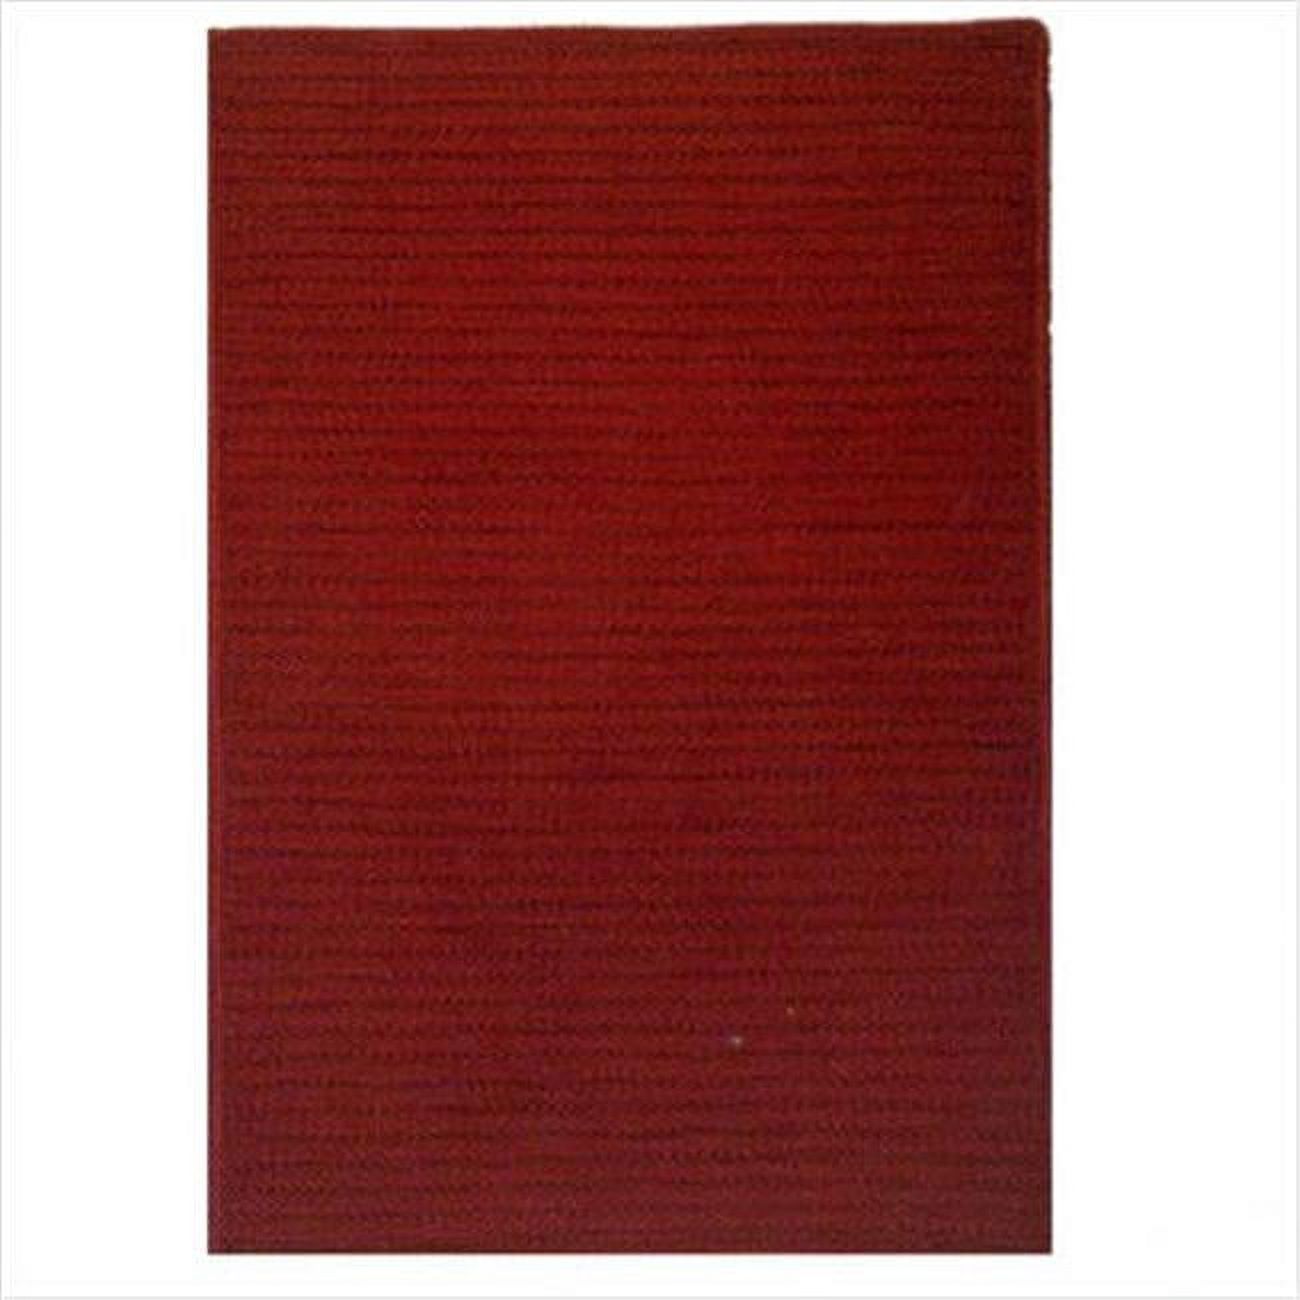 Colonial Mills 2' x 5' Maroon Red Rectangular Braided Stair Tread Rug' - image 1 of 6